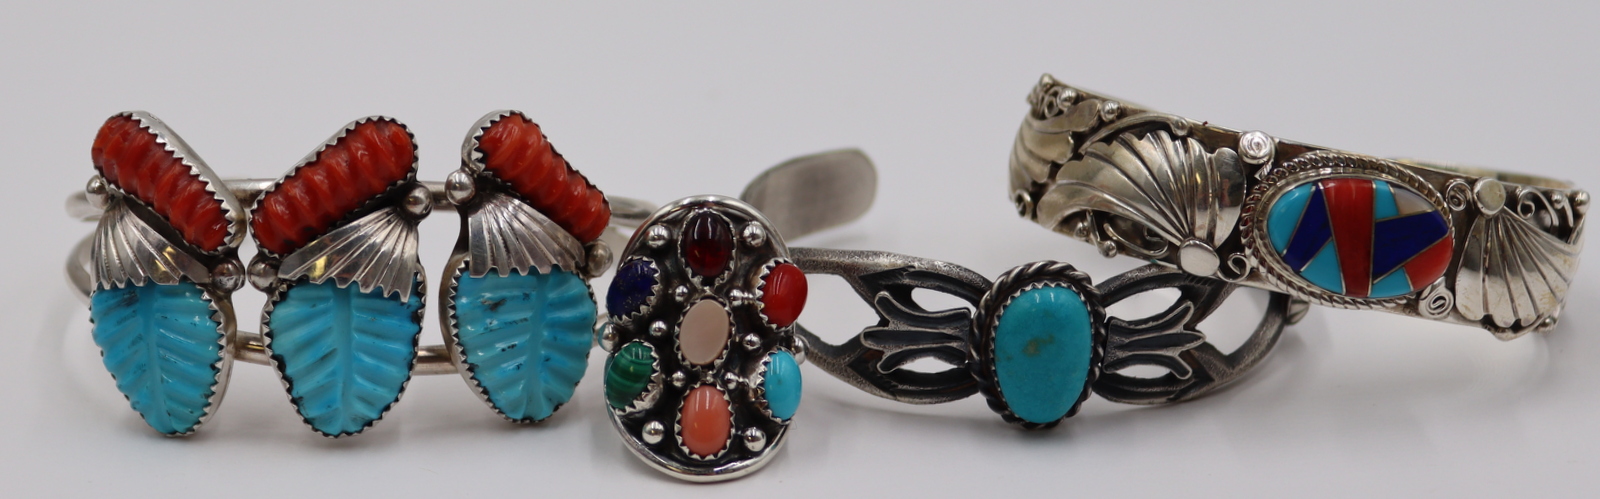 JEWELRY GROUPING OF SILVER SOUTHWEST 3bdf58